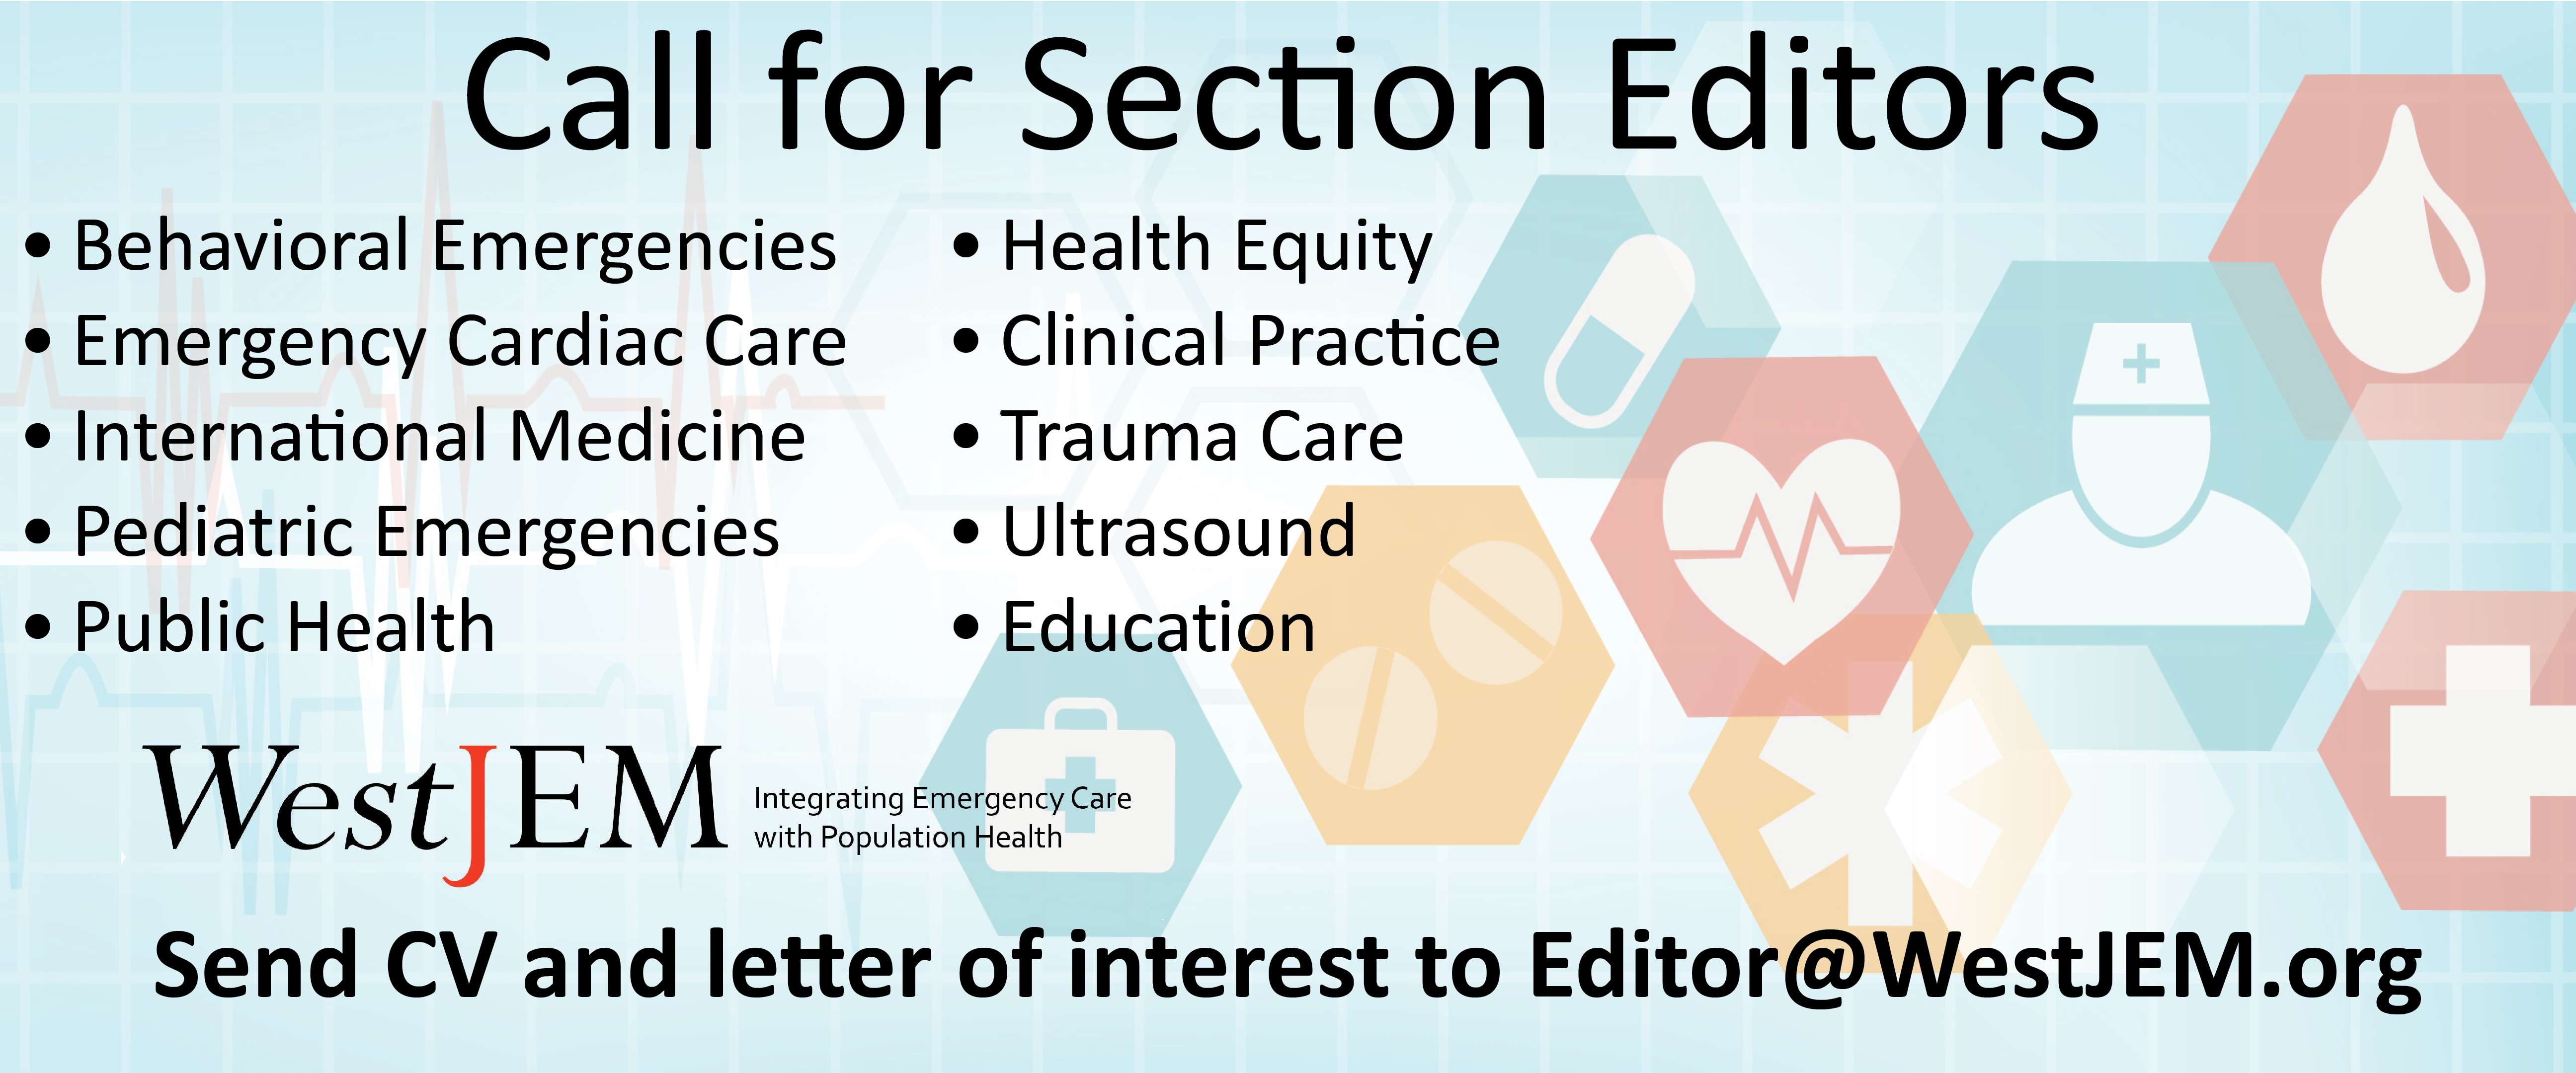 Call-for-Section-Editors-March-2022-Banner